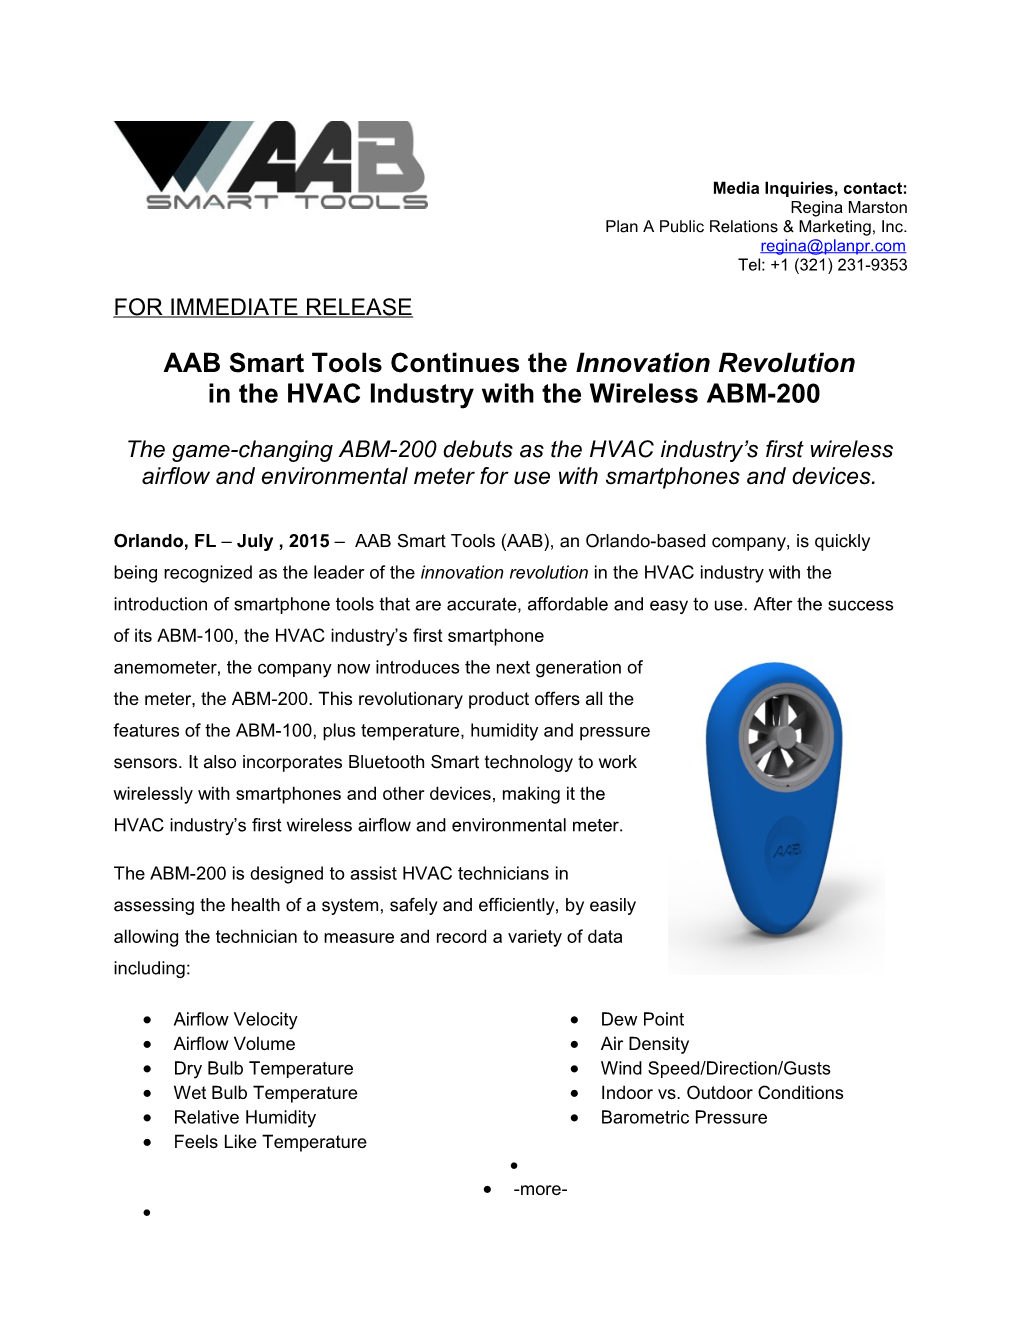 AAB Smart Tools Continues the Innovation Revolution